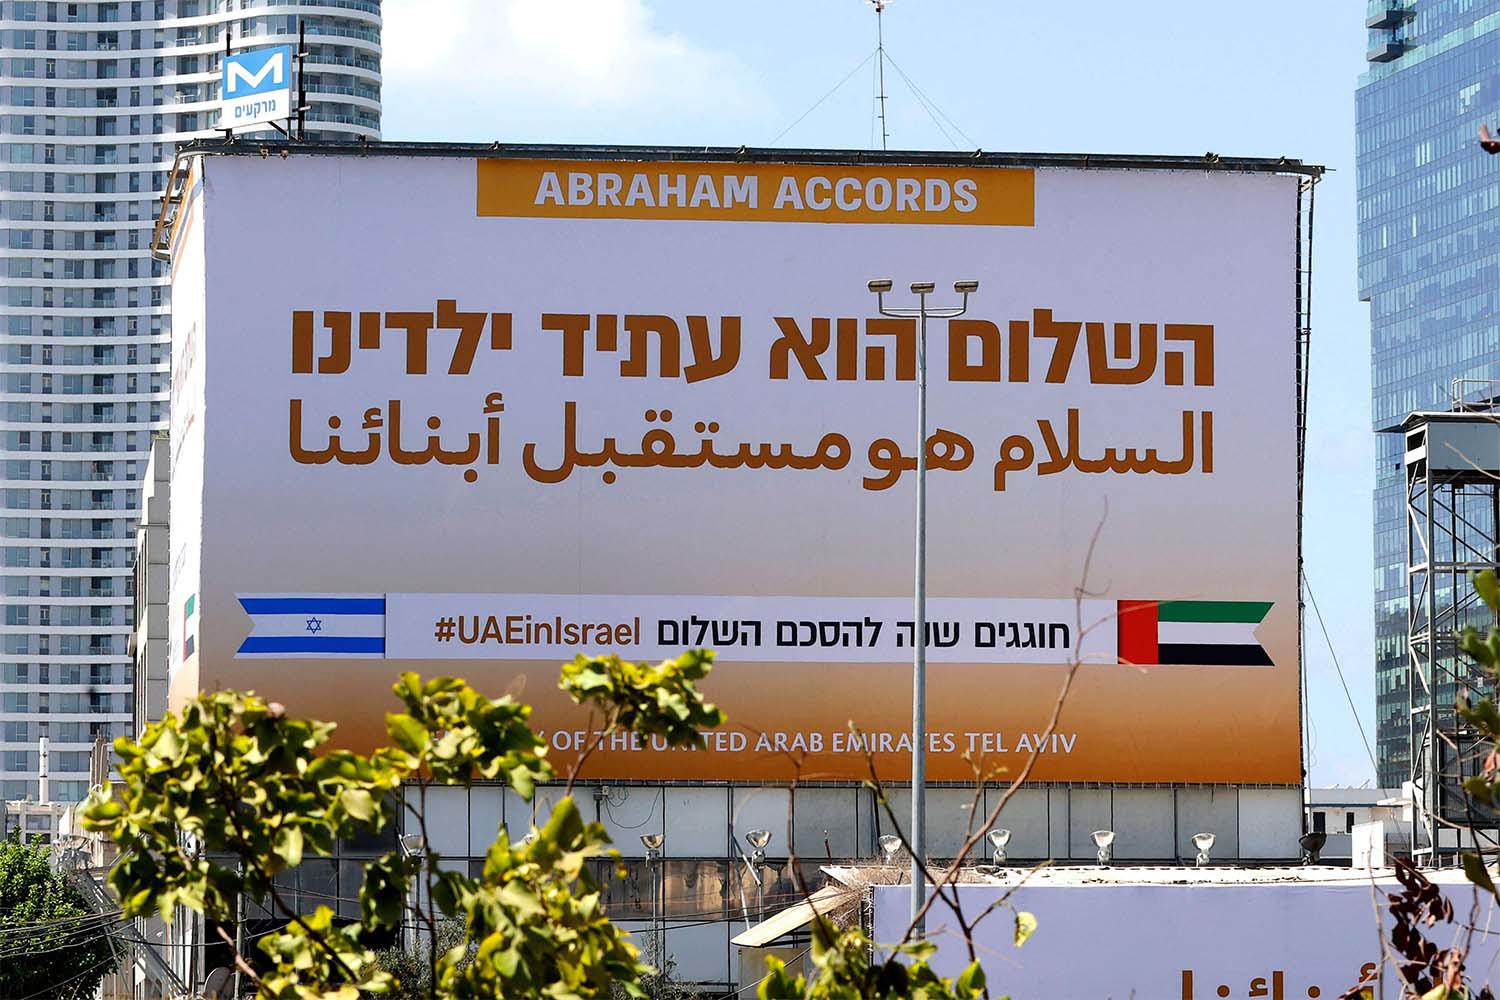 The economic benefits have come quickly for the UAE and Israel from US-brokered Abraham Accords